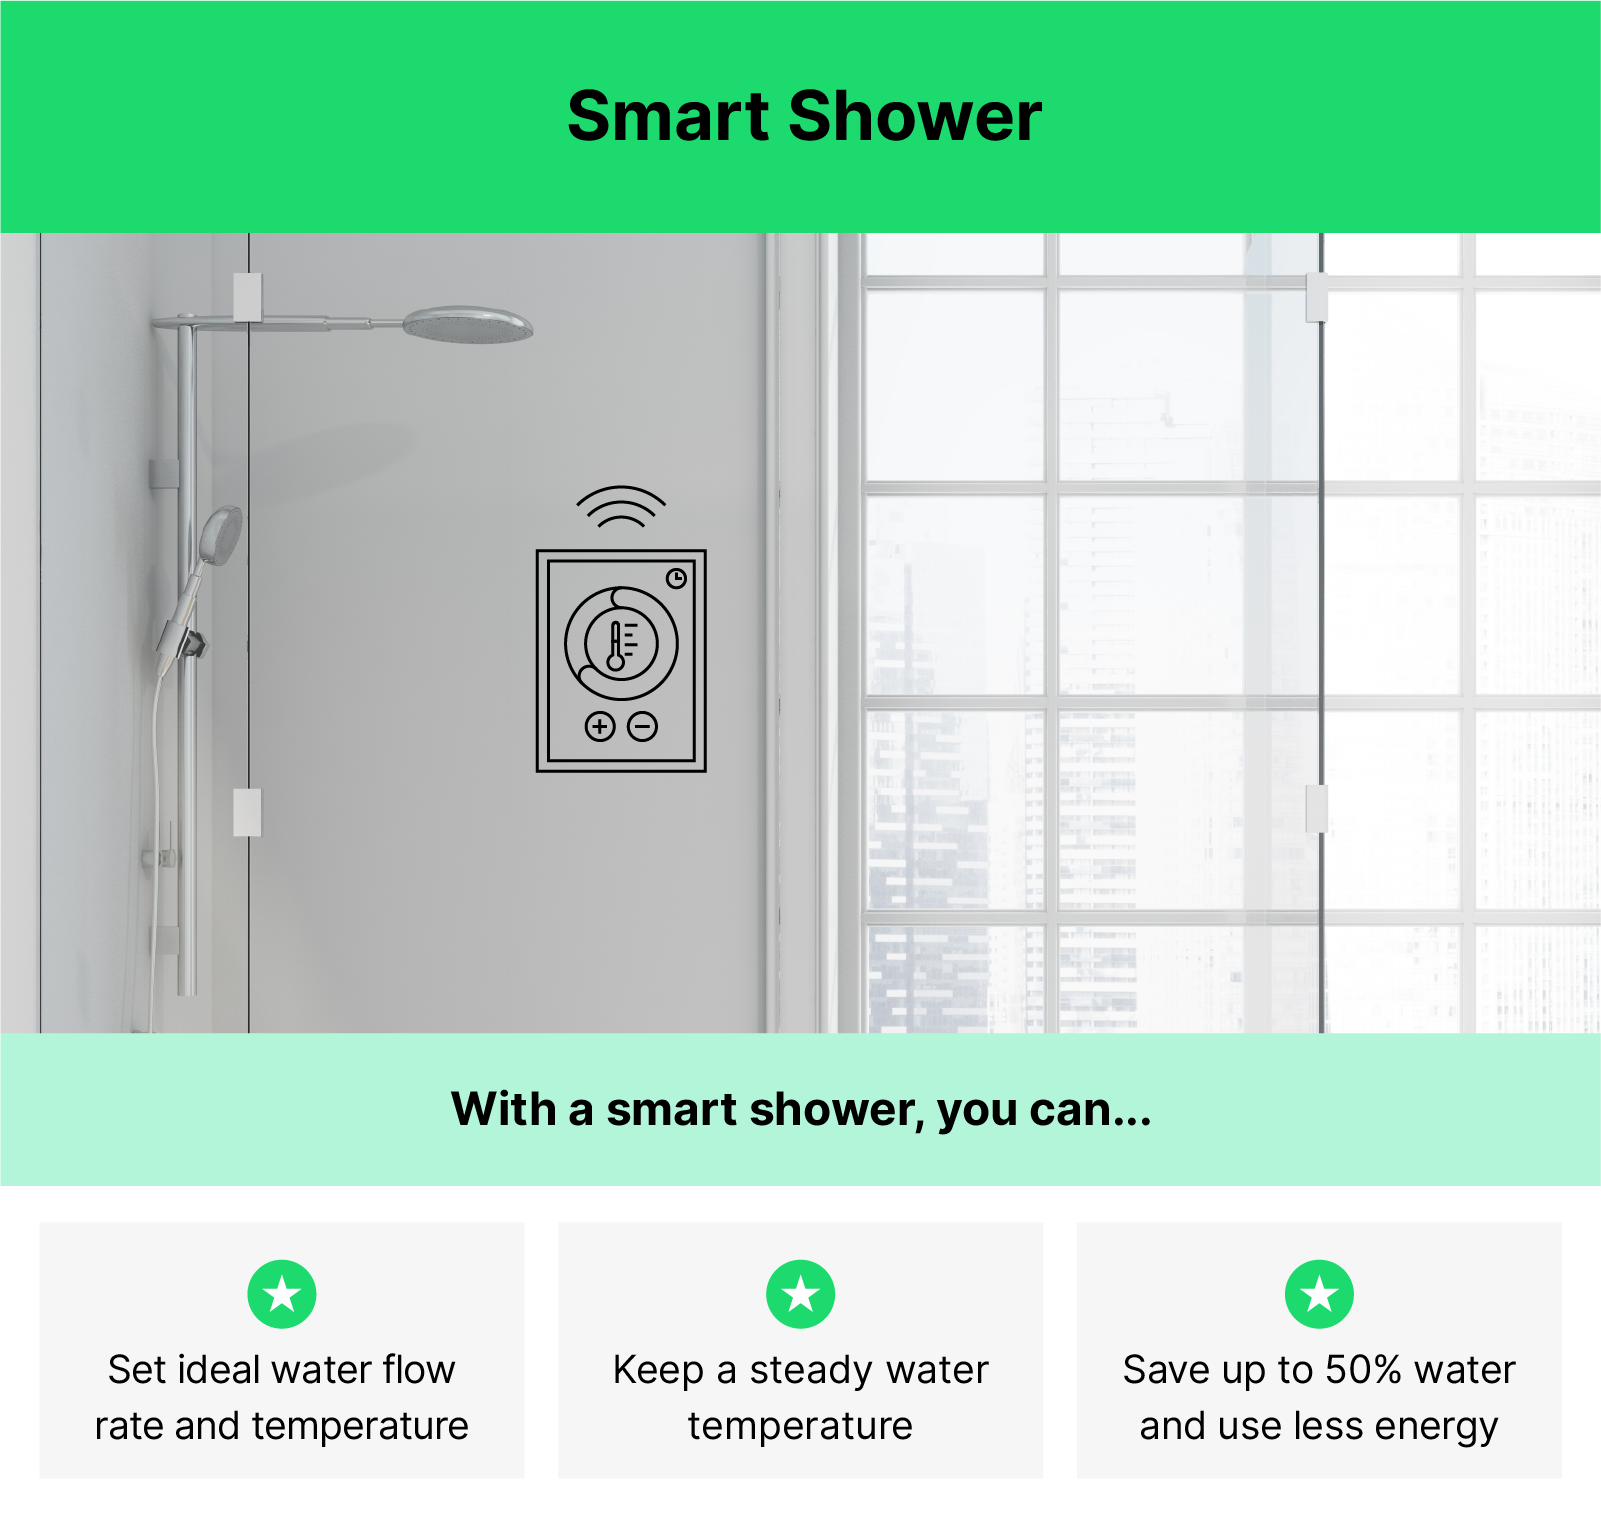 Image of a shower with illustrated smart tech elements with text below